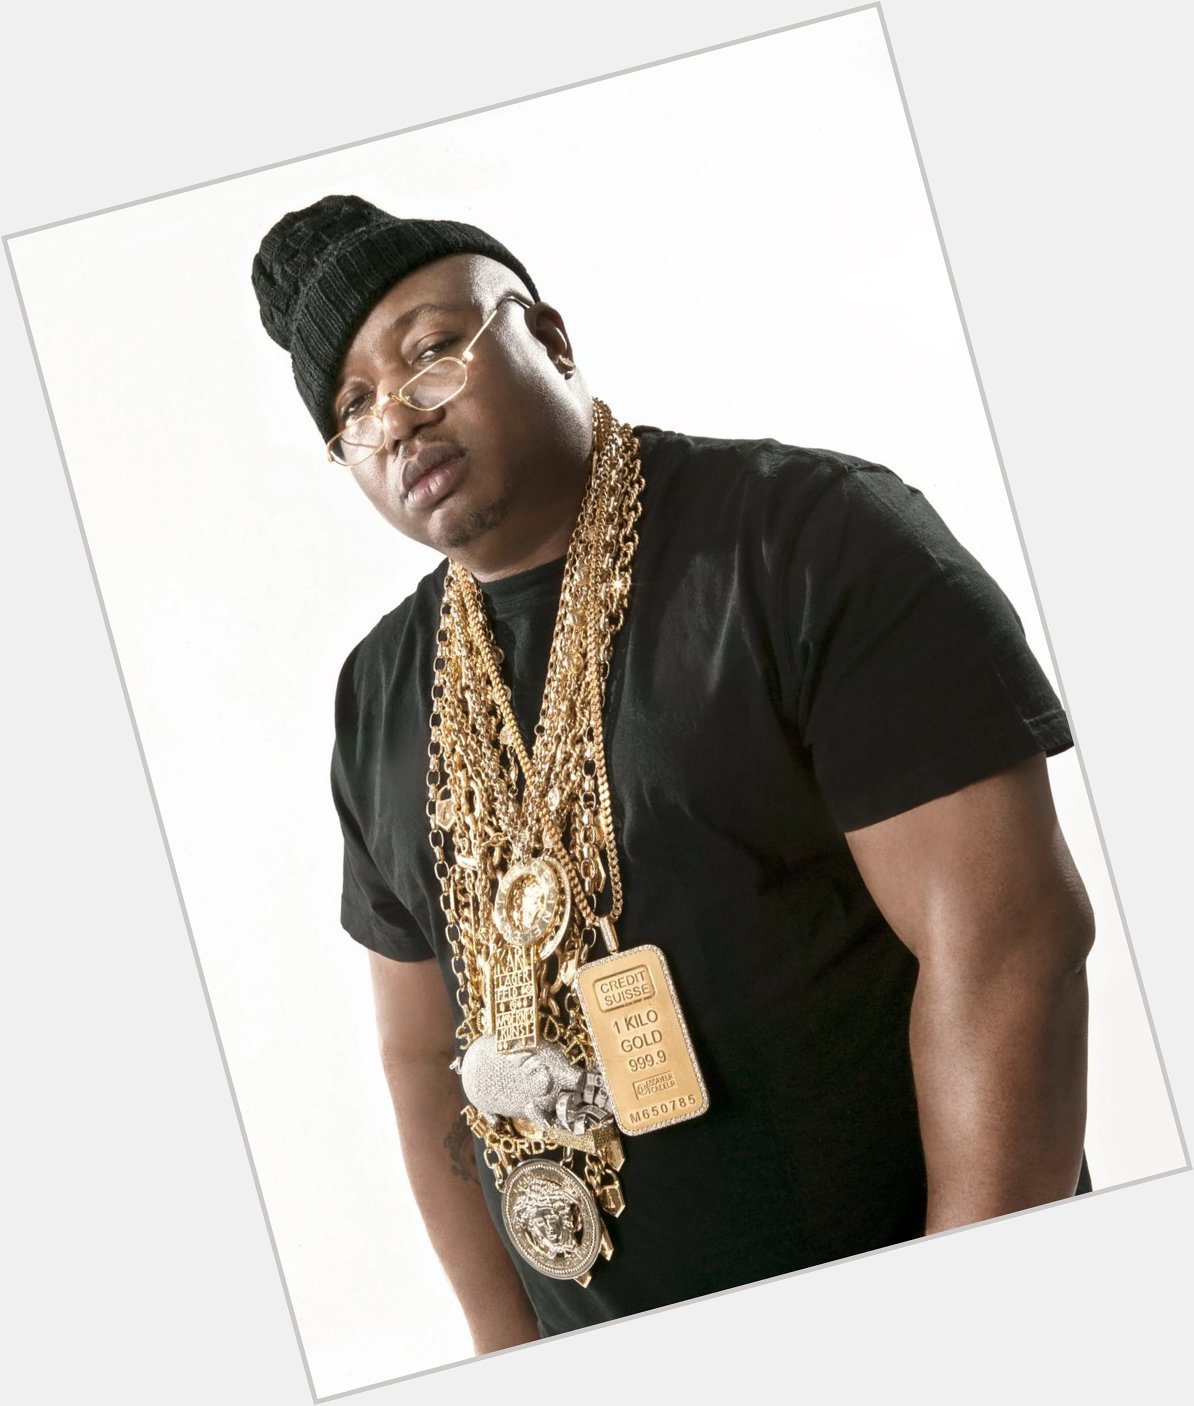 Happy 54th Birthday, to the legendary E-40! 

E-40 once said 